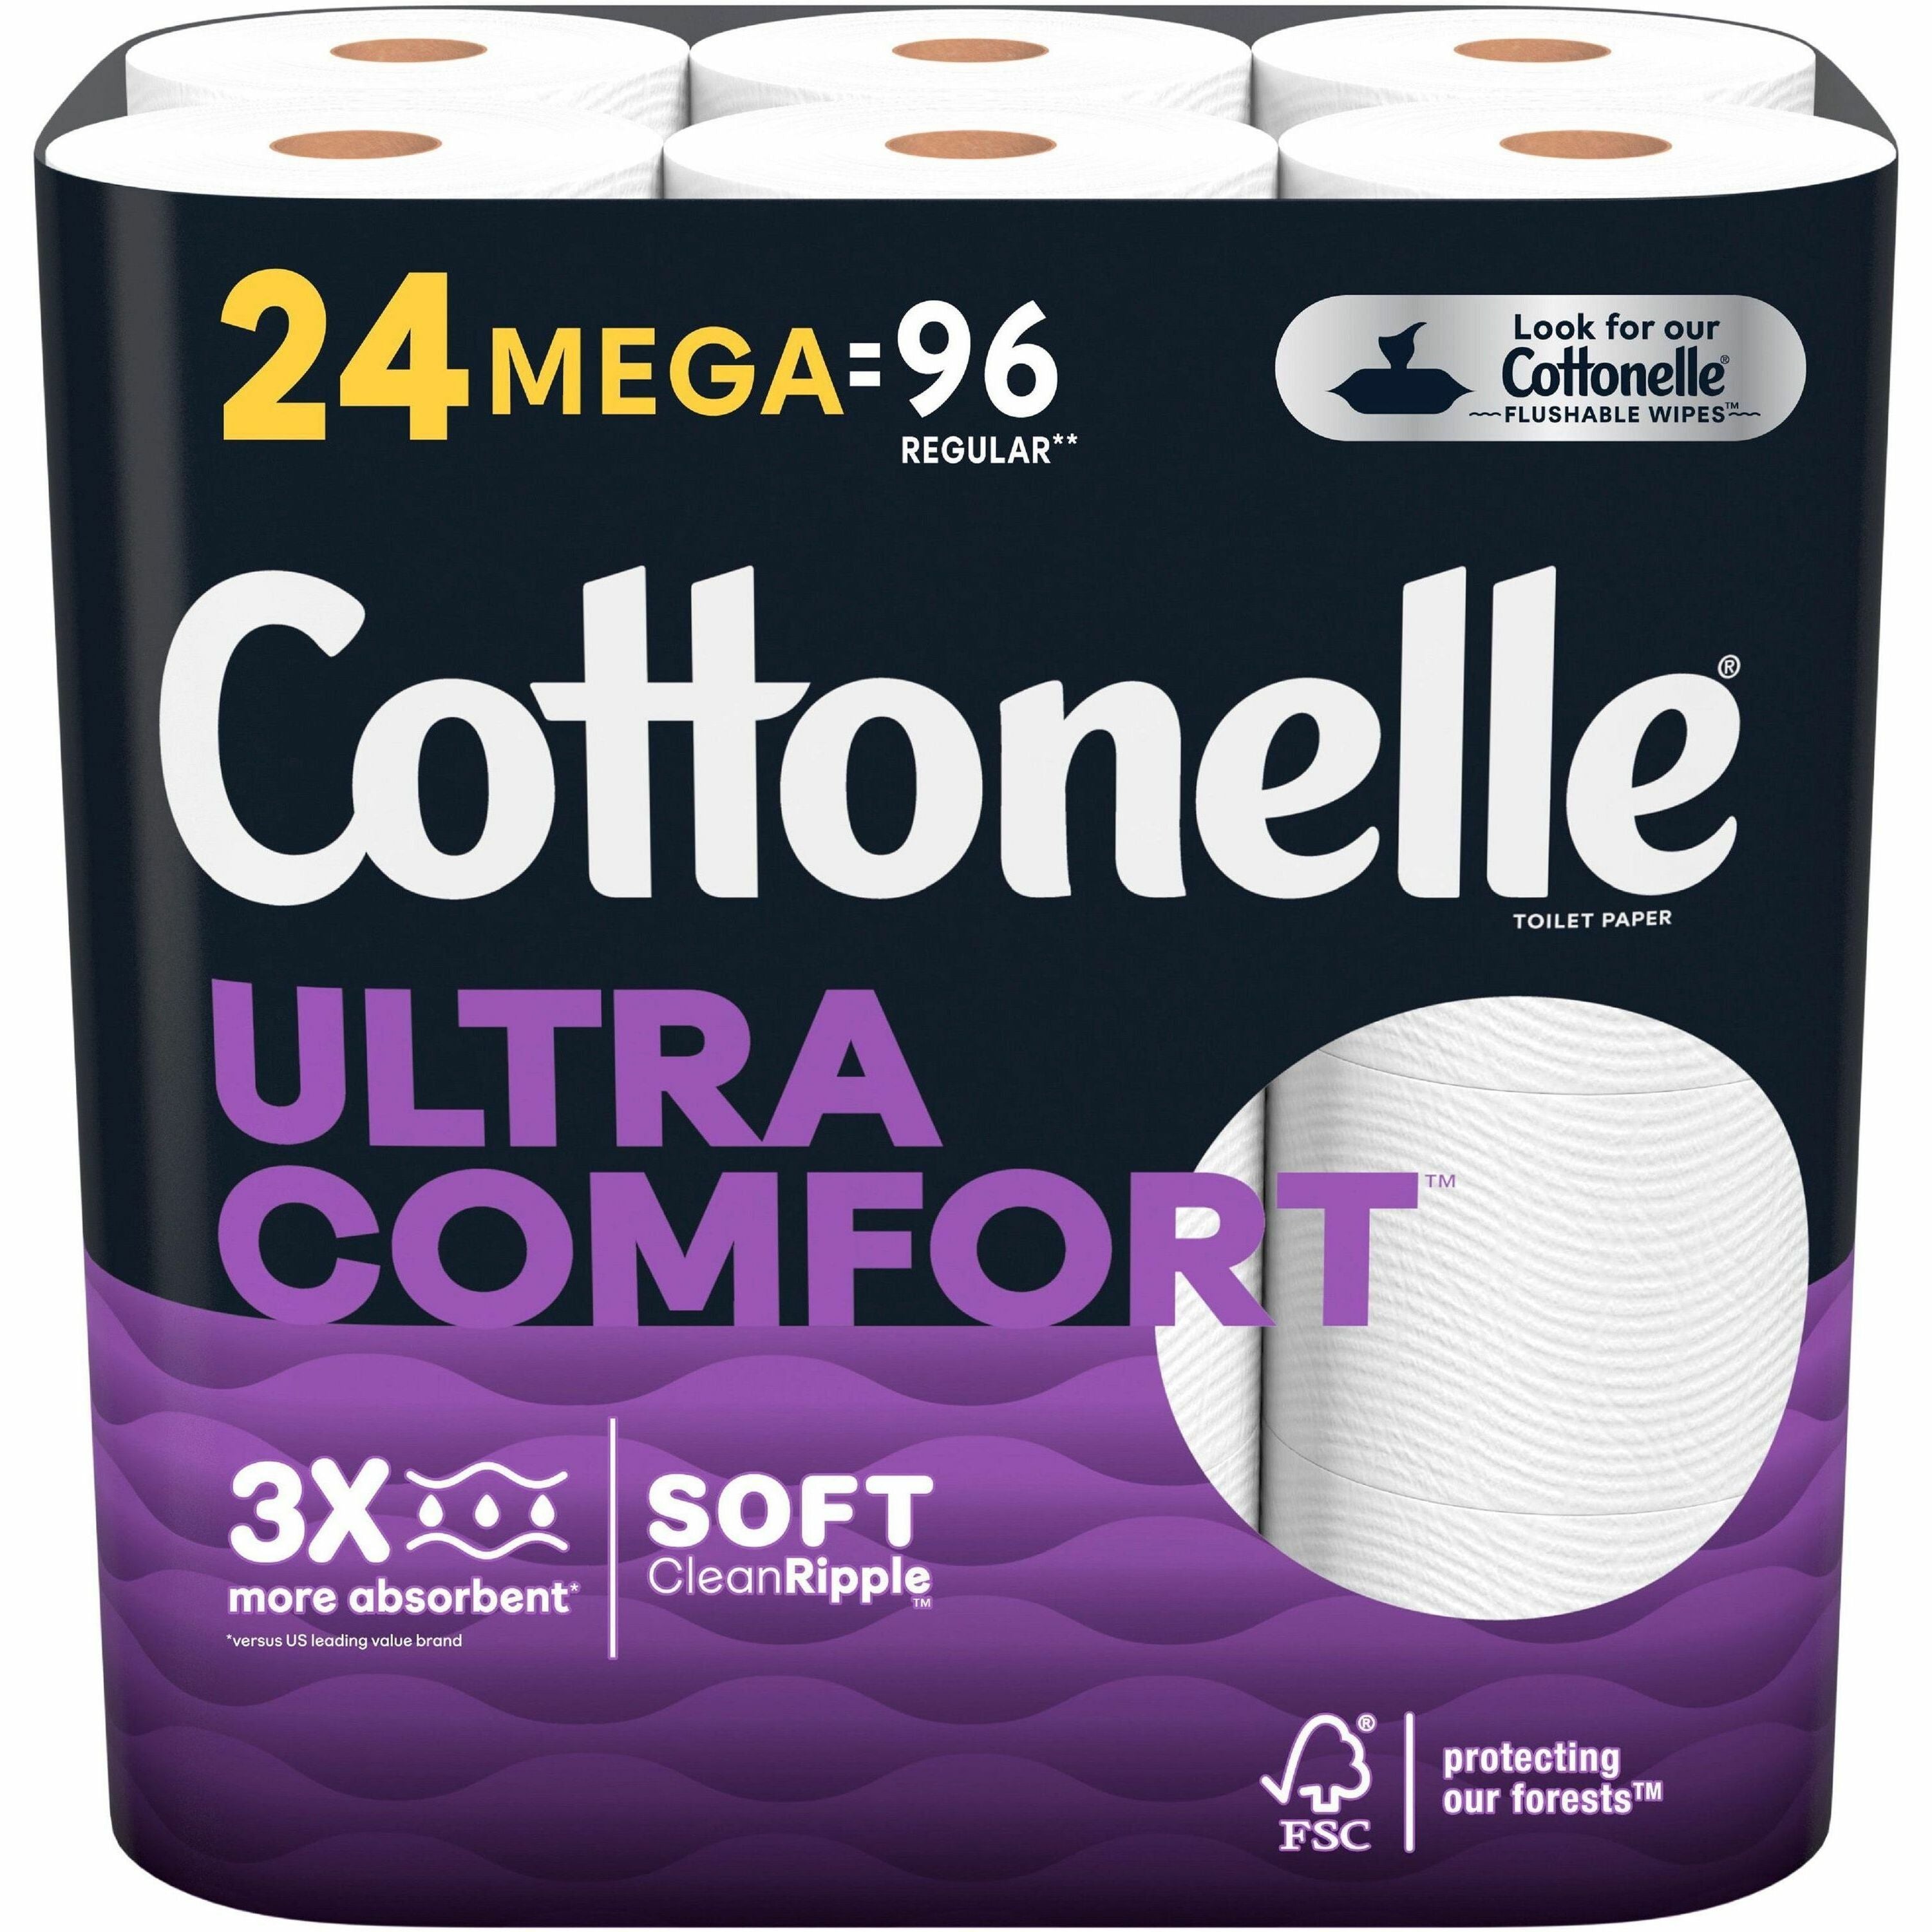 cottonelle-ultra-comfort-toilet-paper-2-ply-268-sheets-roll-white-fiber-moisture-absorbent-septic-safe-sewer-safe-chemical-free-dye-free-flushable-clog-safe-thick-paraben-free-fragrance-free-for-toilet-2-carton_kcc54174ct - 1